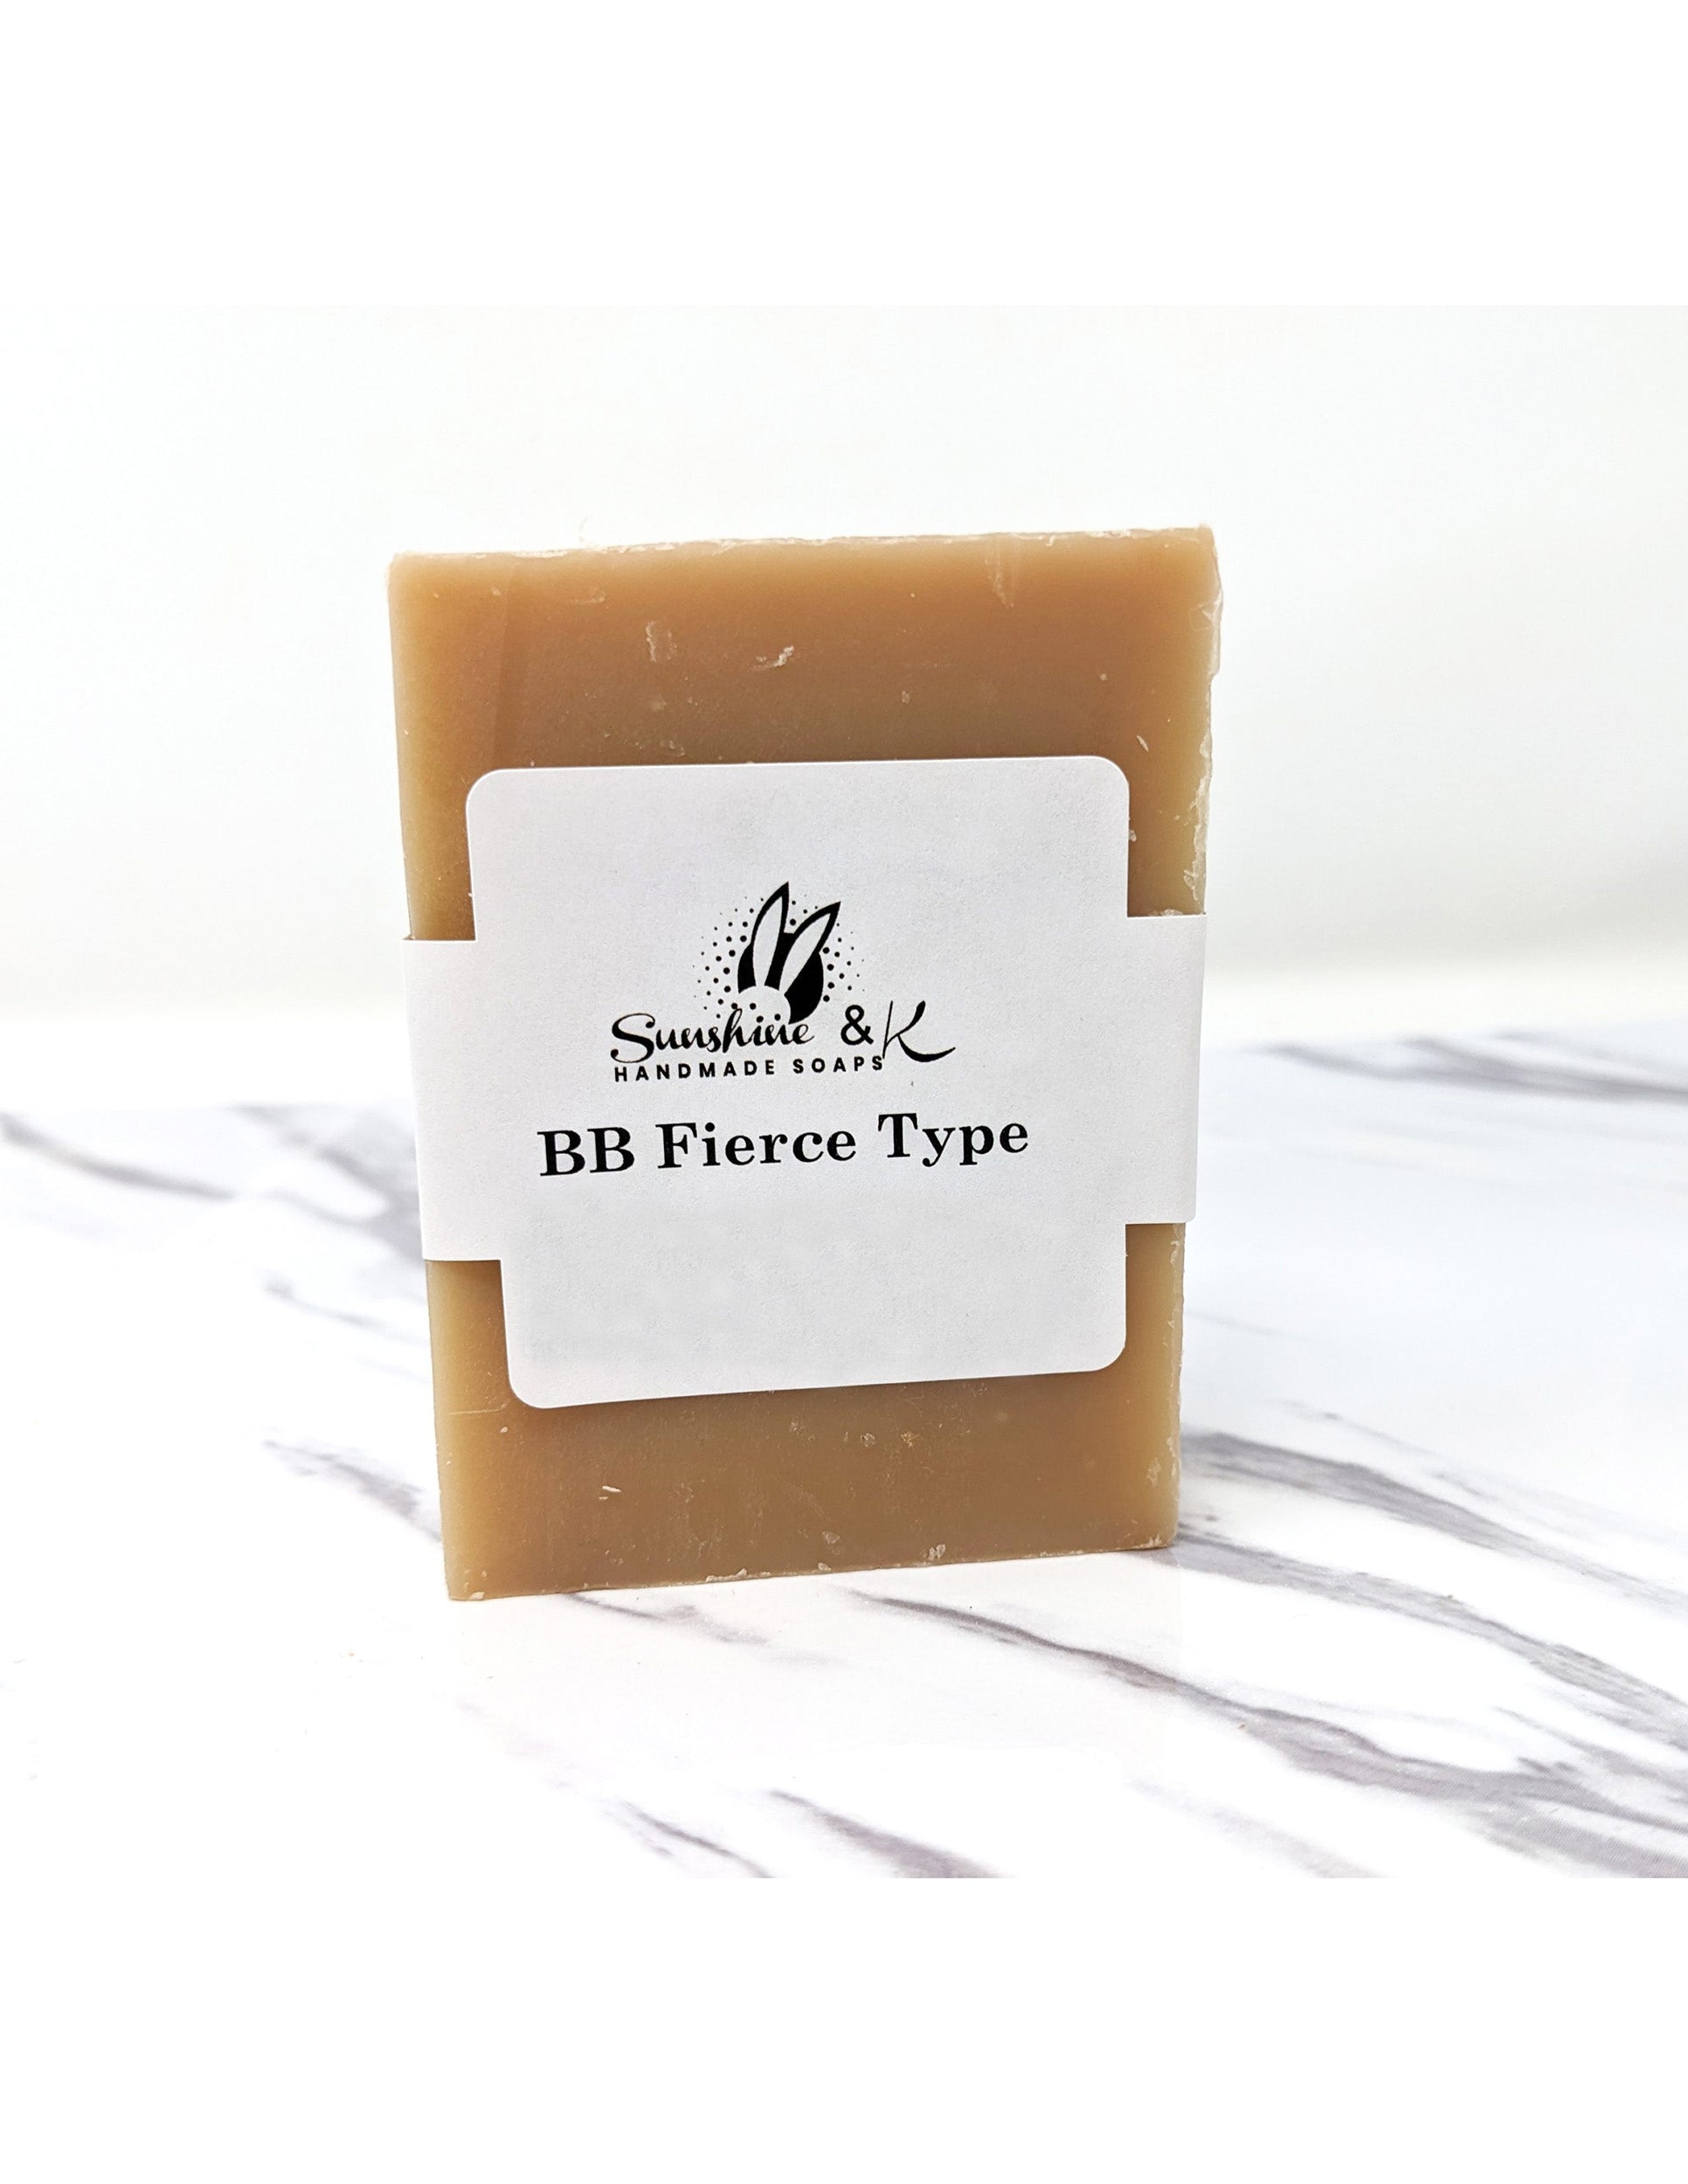 Bramble Berry’s Fierce Type - Body & Face Bar Soap, Handmade Bath Soap, Moisturizing Bar Soap With Beeswax, Rice Bran Oil, & Natural Base Oils, Natural Soap Bars, 5 oz, Sunshine & K Handmade Soaps - sunshine-handmade-soaps